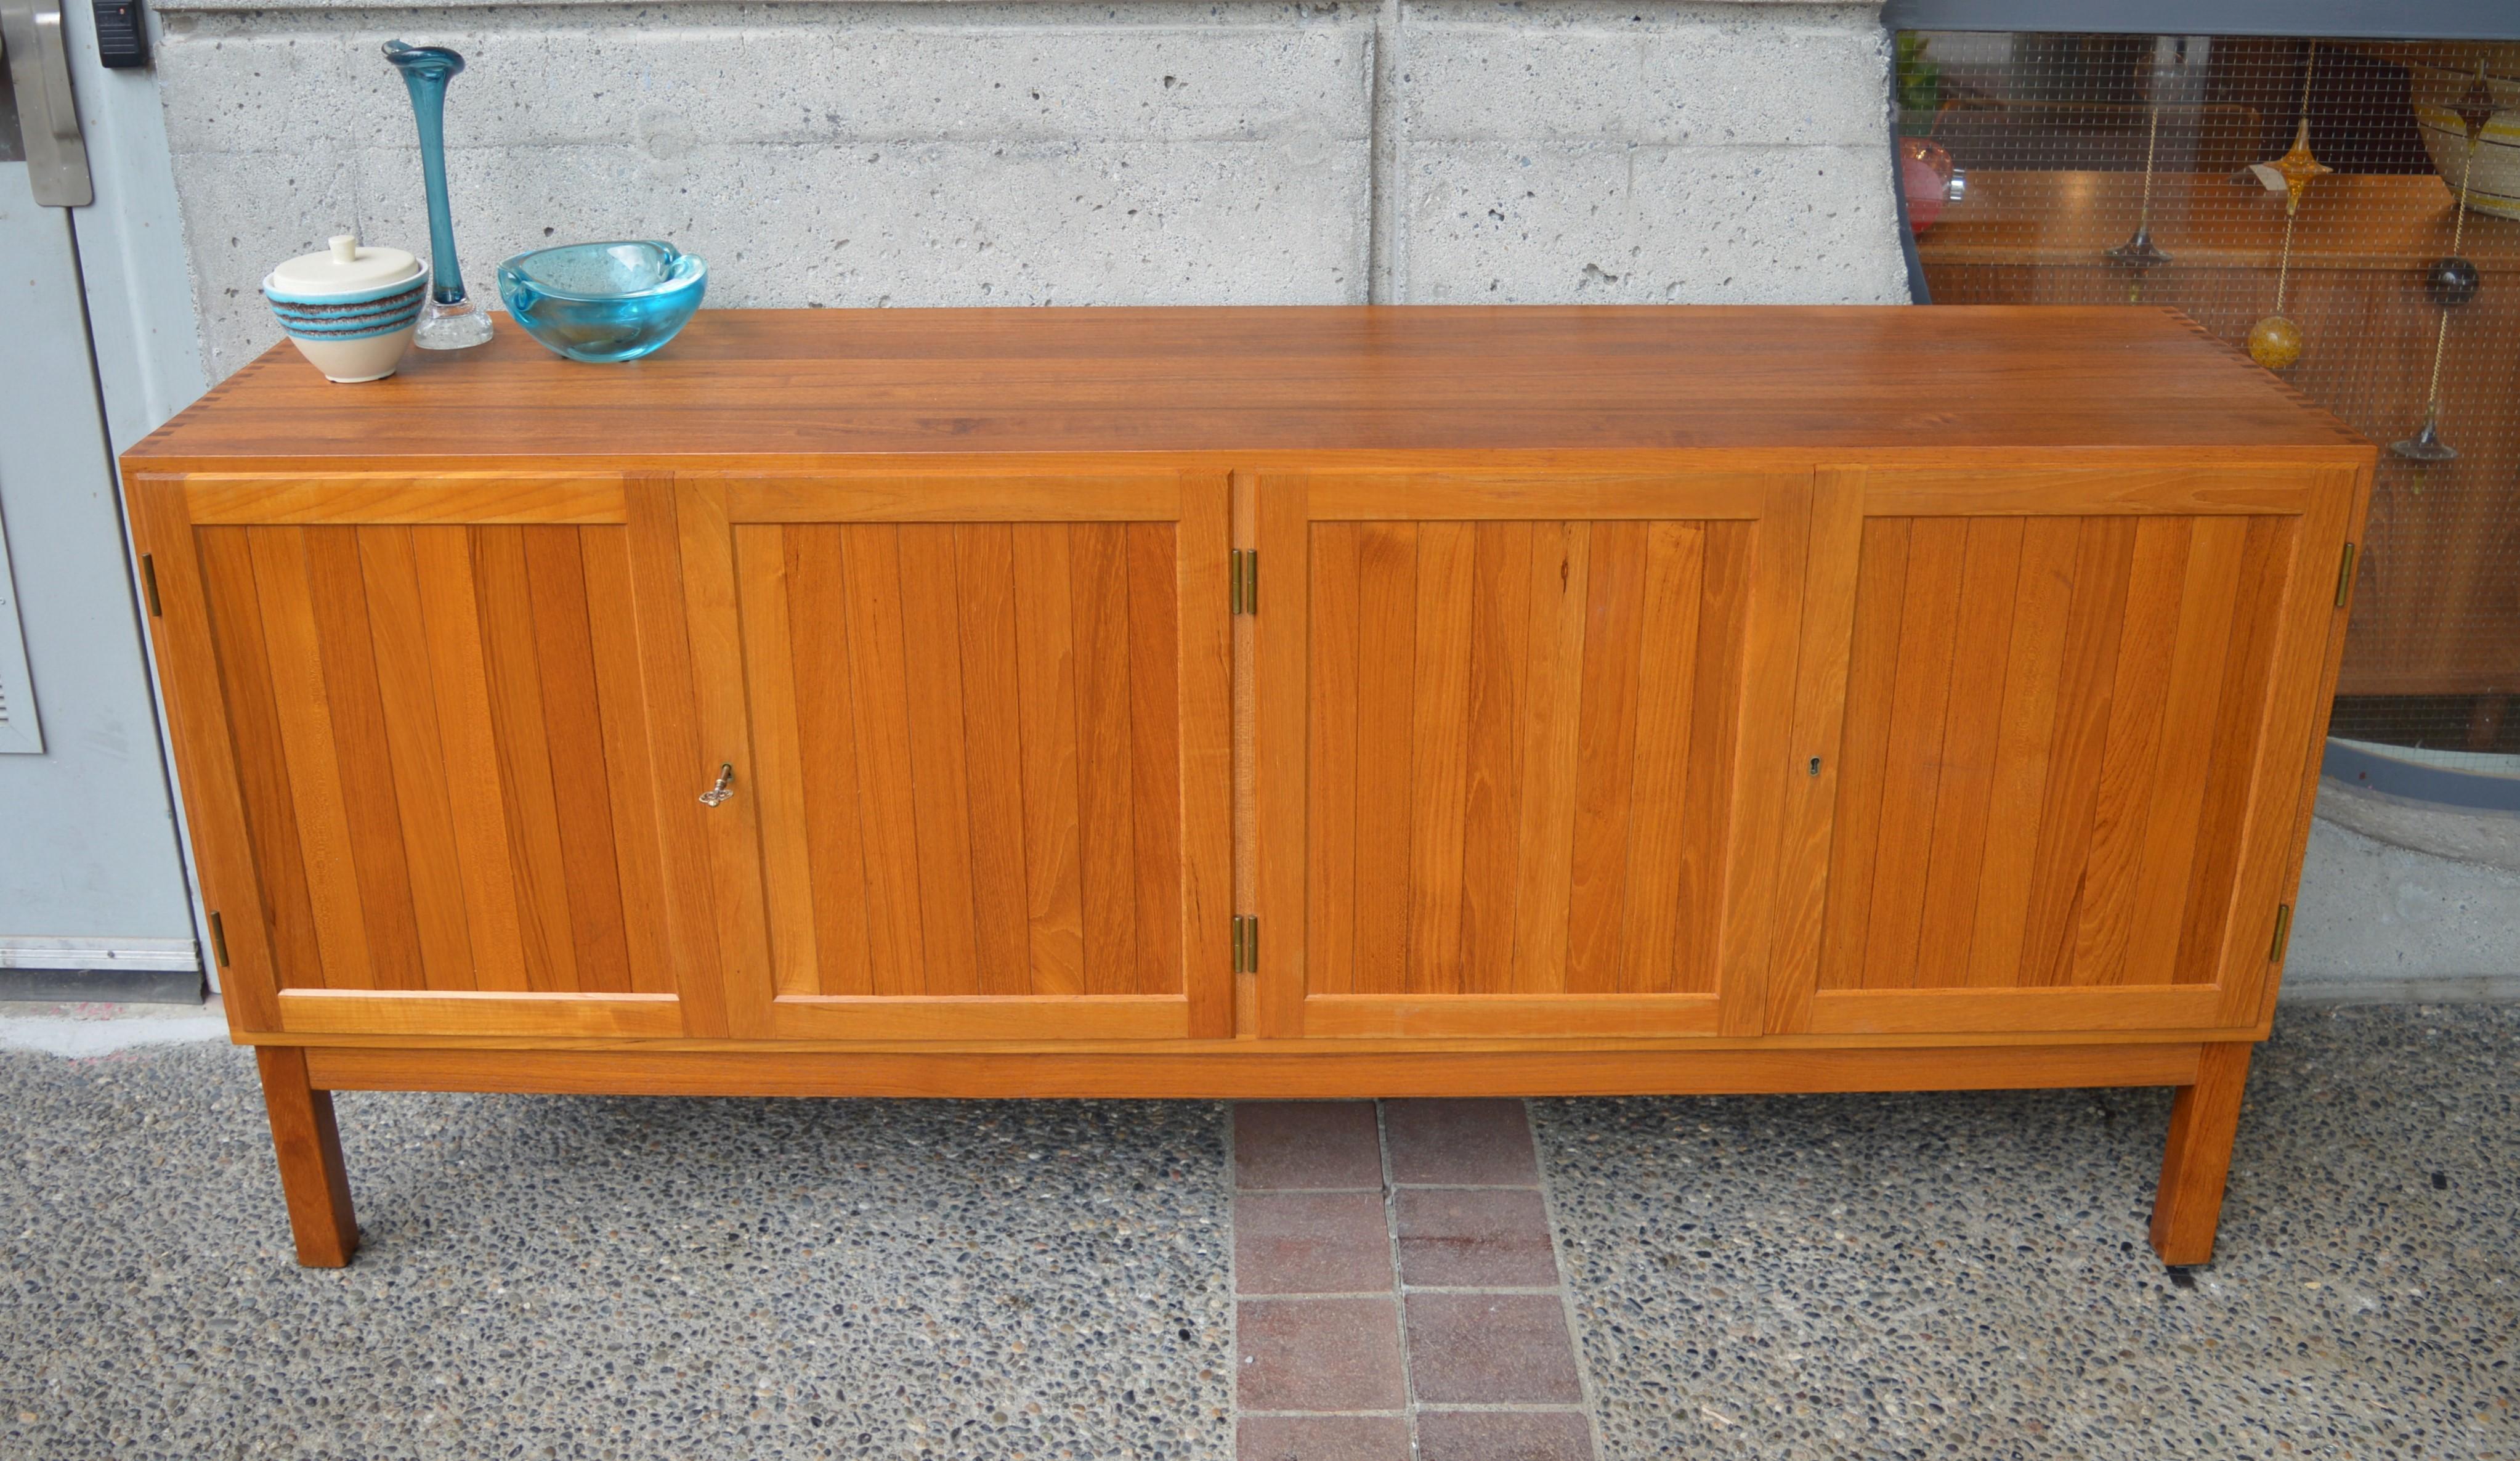 This impeccable Danish modern teak credenza is made entirely from solid teak! Note the amazing 3/4